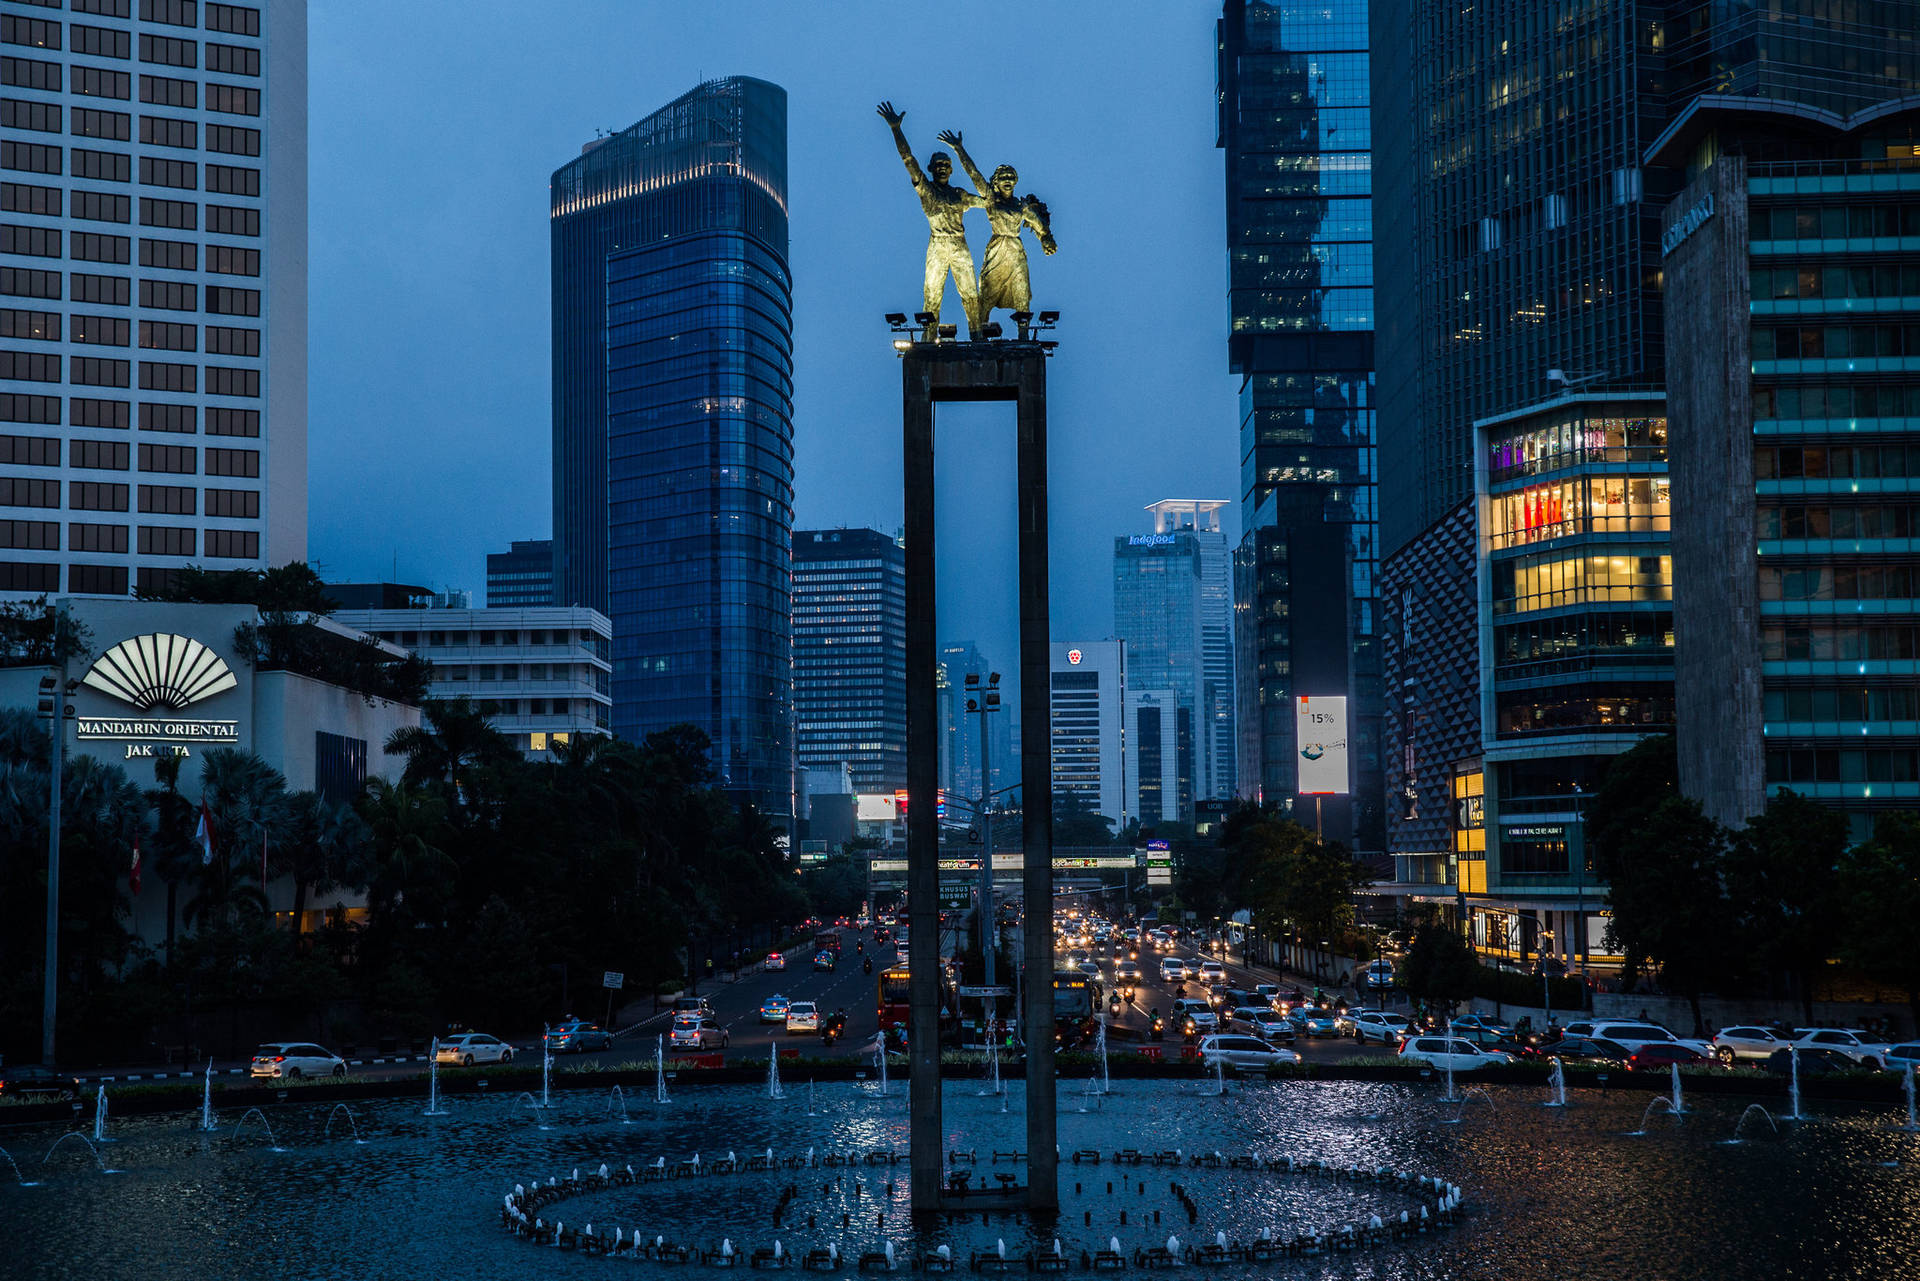 Jakartaselamat Datang Monument Could Be Translated To German As 